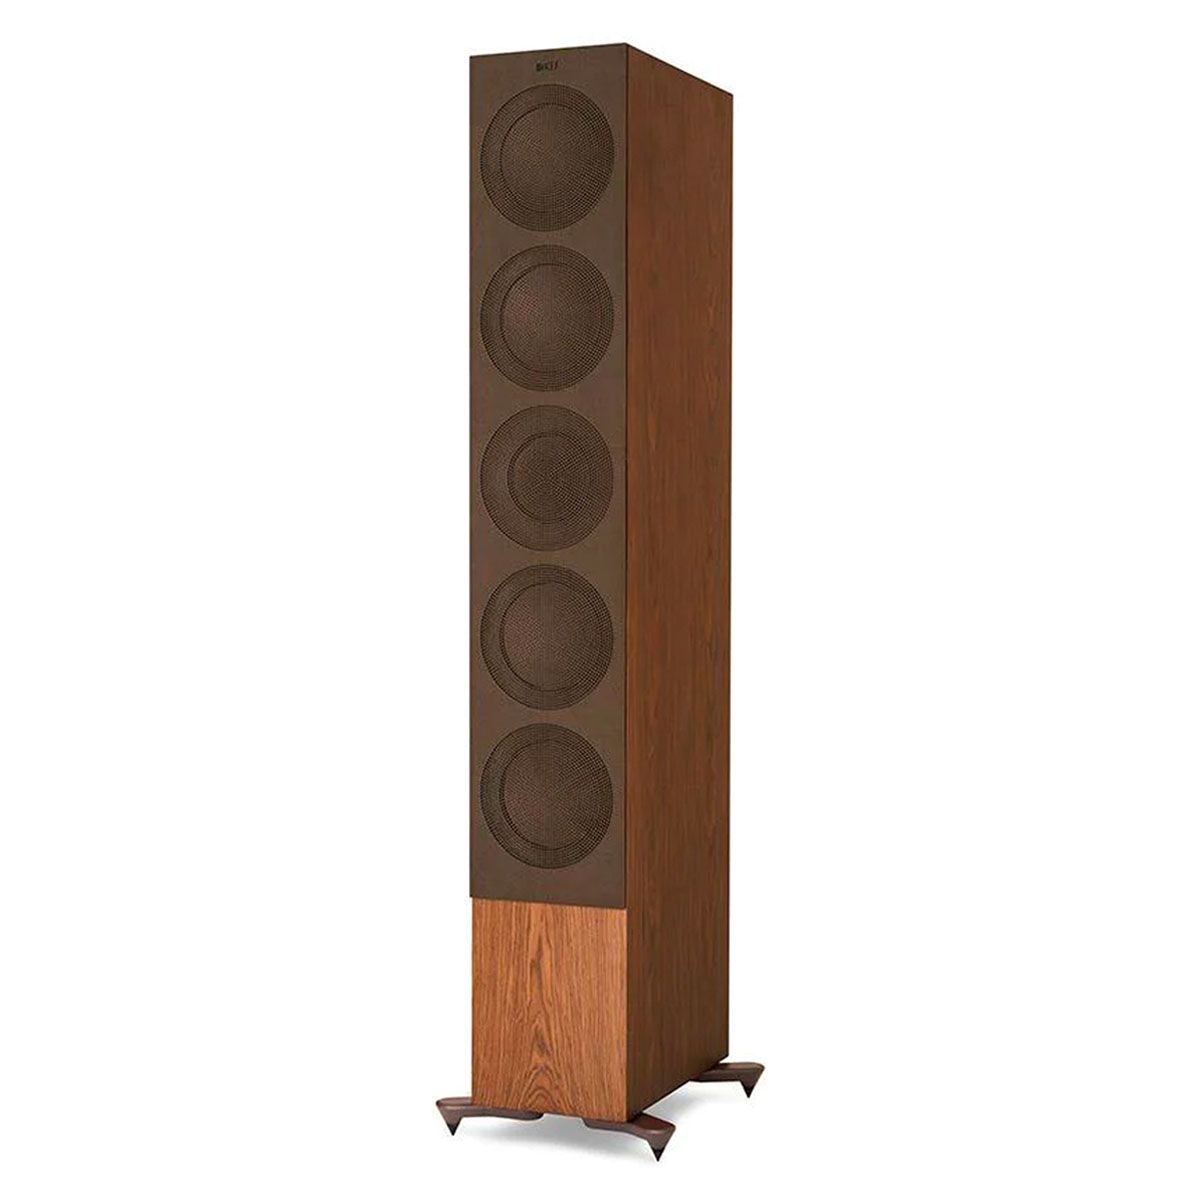 KEF R11 Floorstanding Loudspeaker - Walnut - angled front view with grille